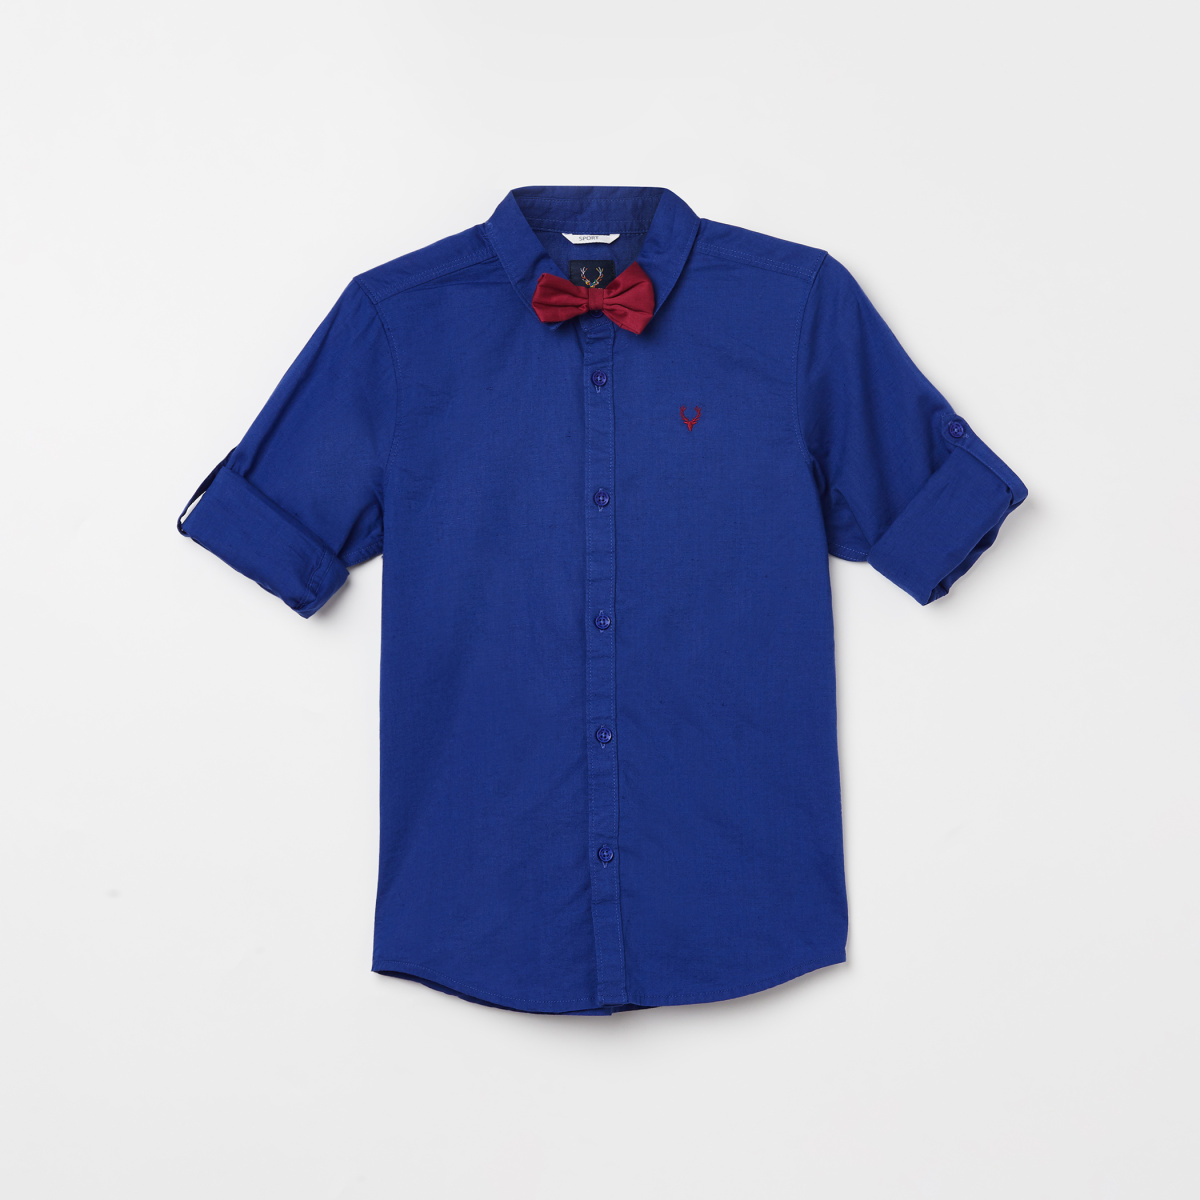 ALLEN SOLLY Boys Solid Regular Fit Casual Shirt with Bow Accent